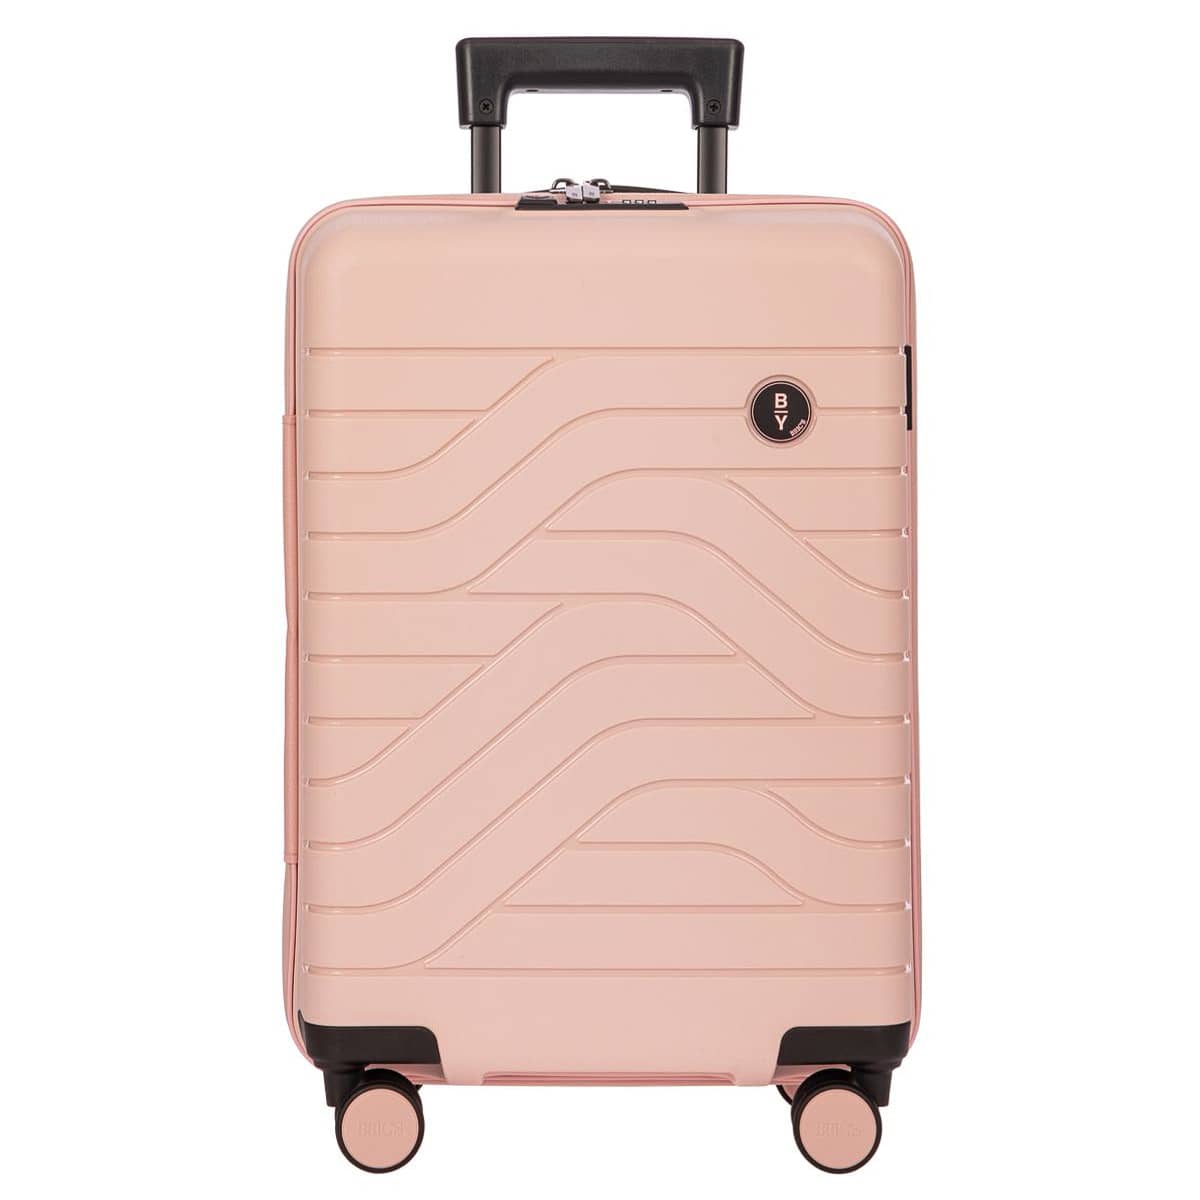 Pink carry on suitcase